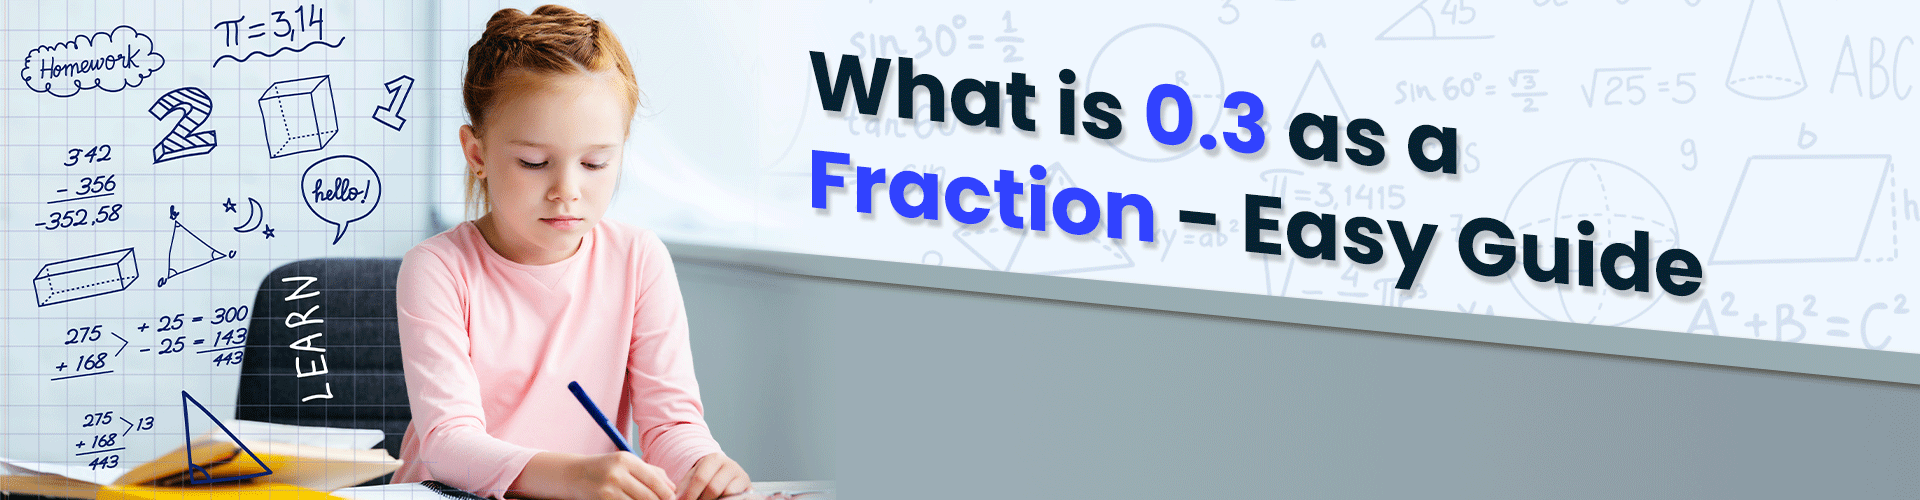 Converting 0.3 as a Fraction